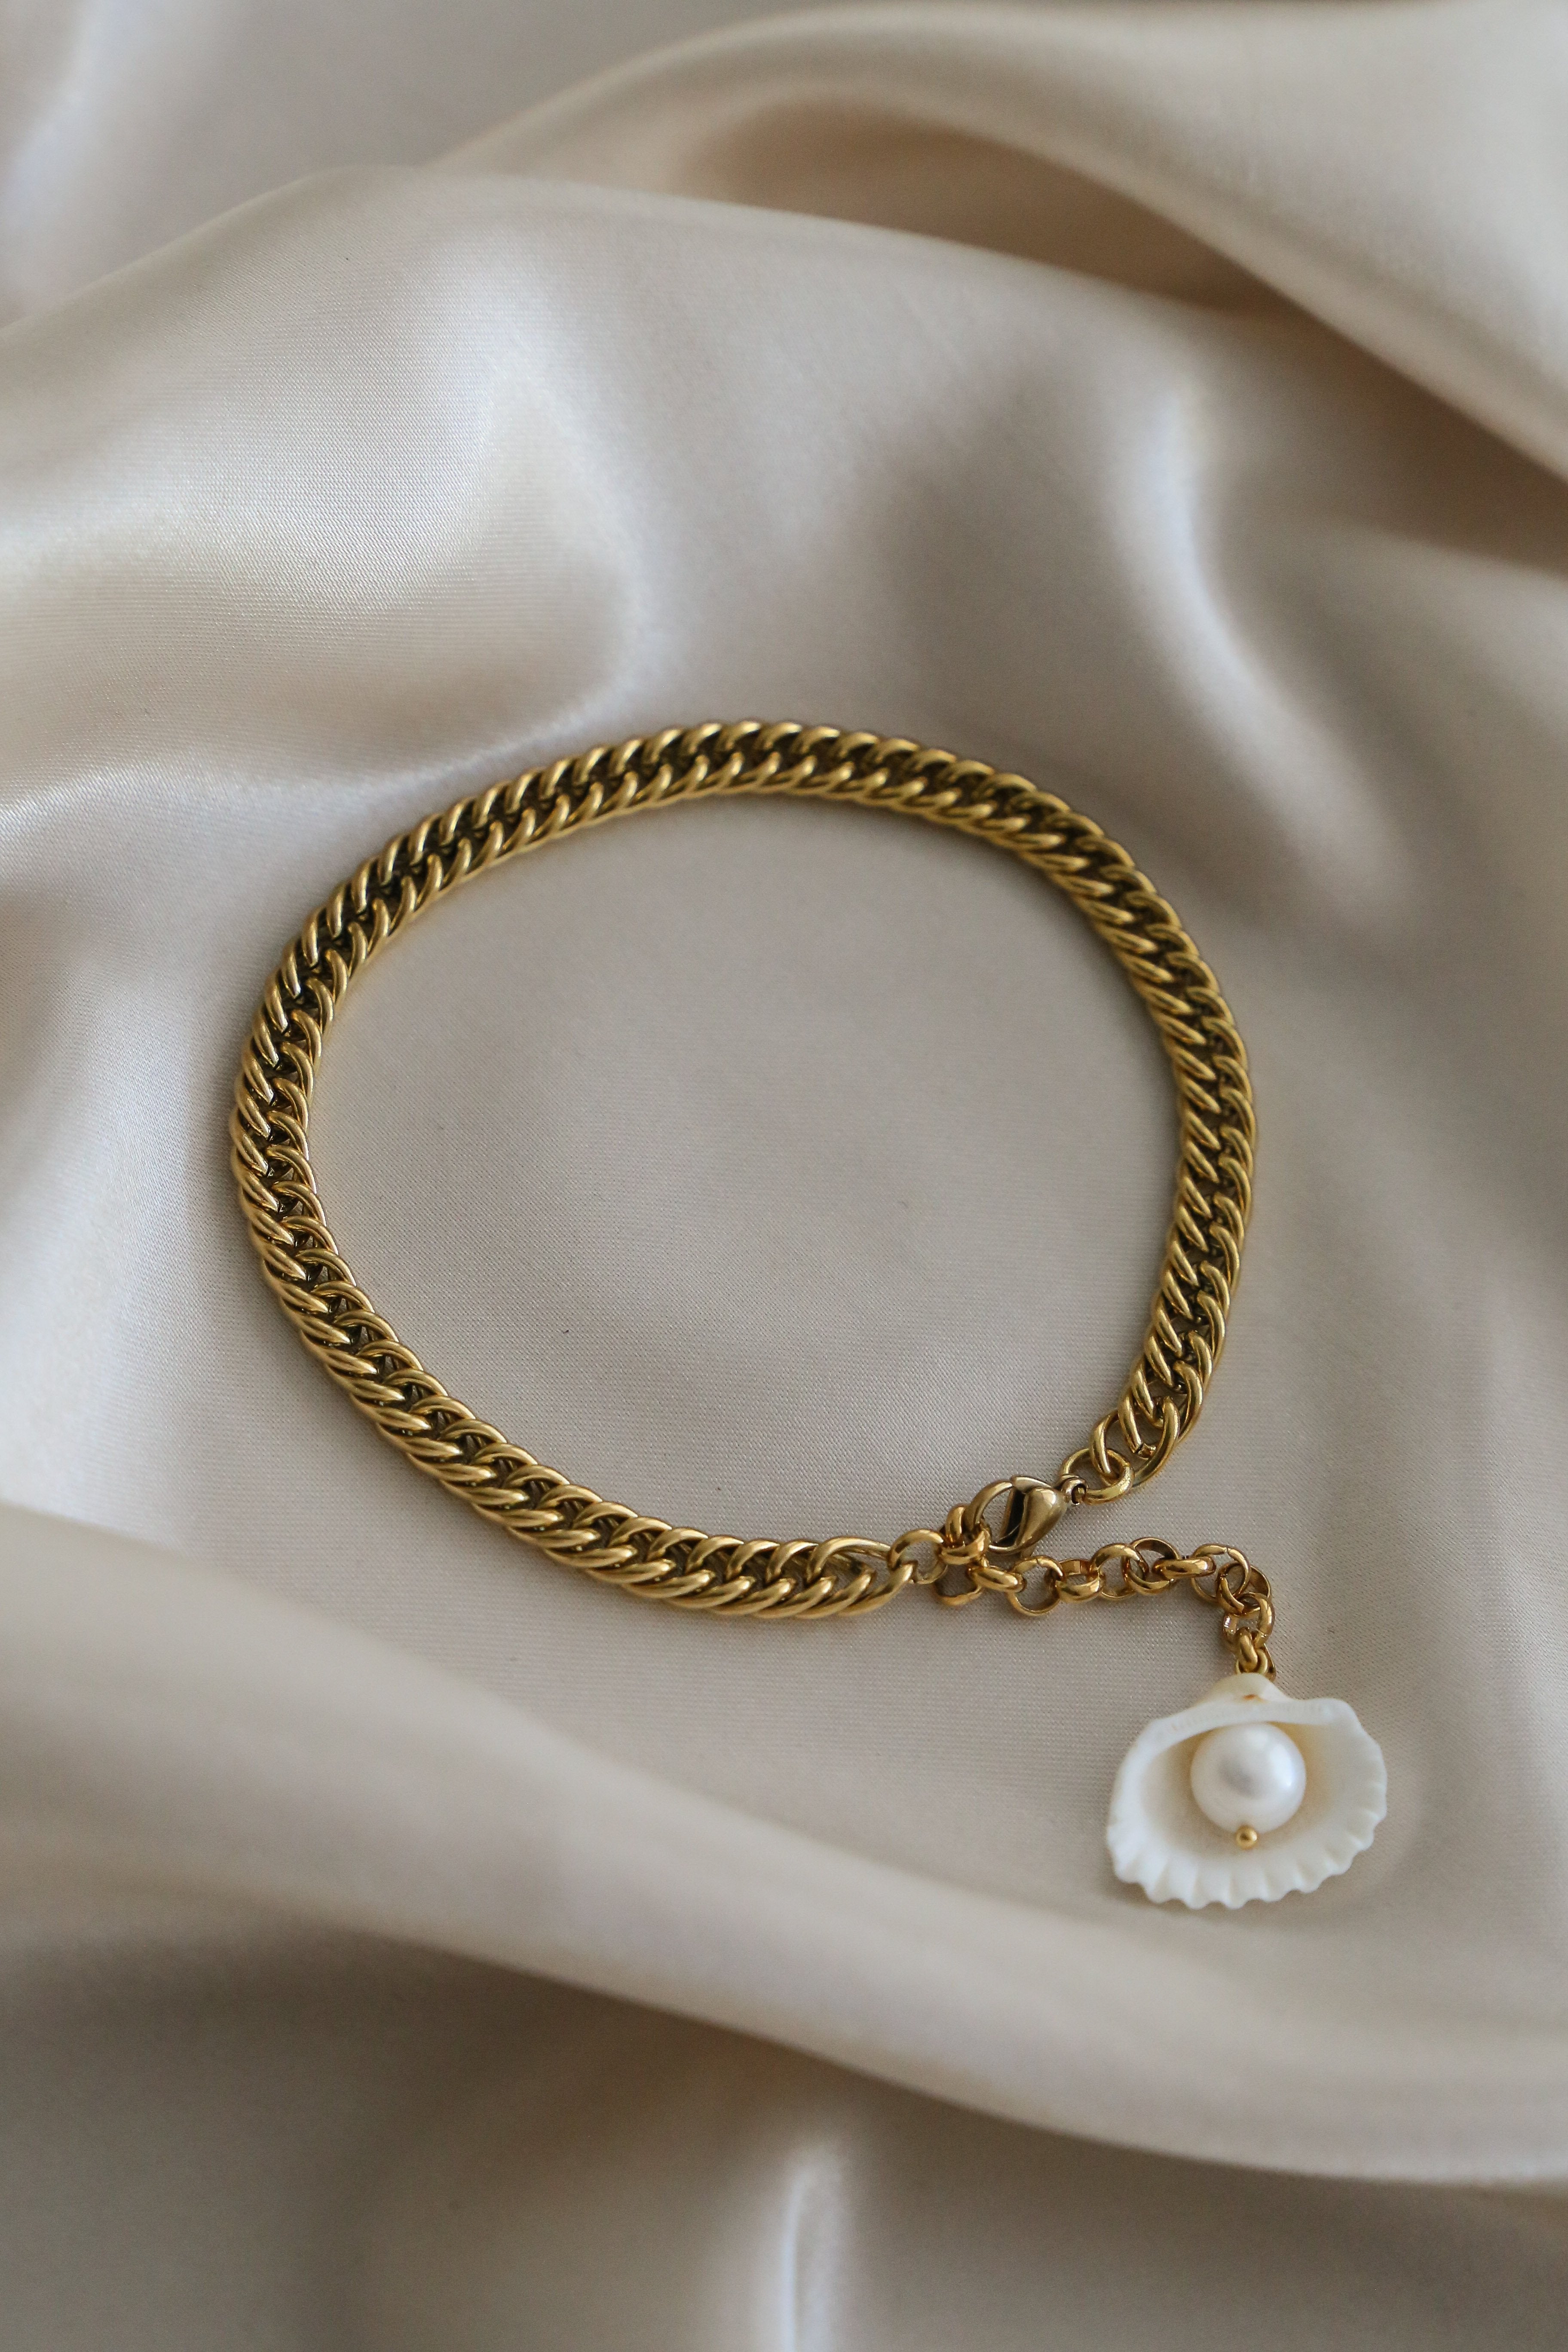 Lido Anklet - Boutique Minimaliste has waterproof, durable, elegant and vintage inspired jewelry